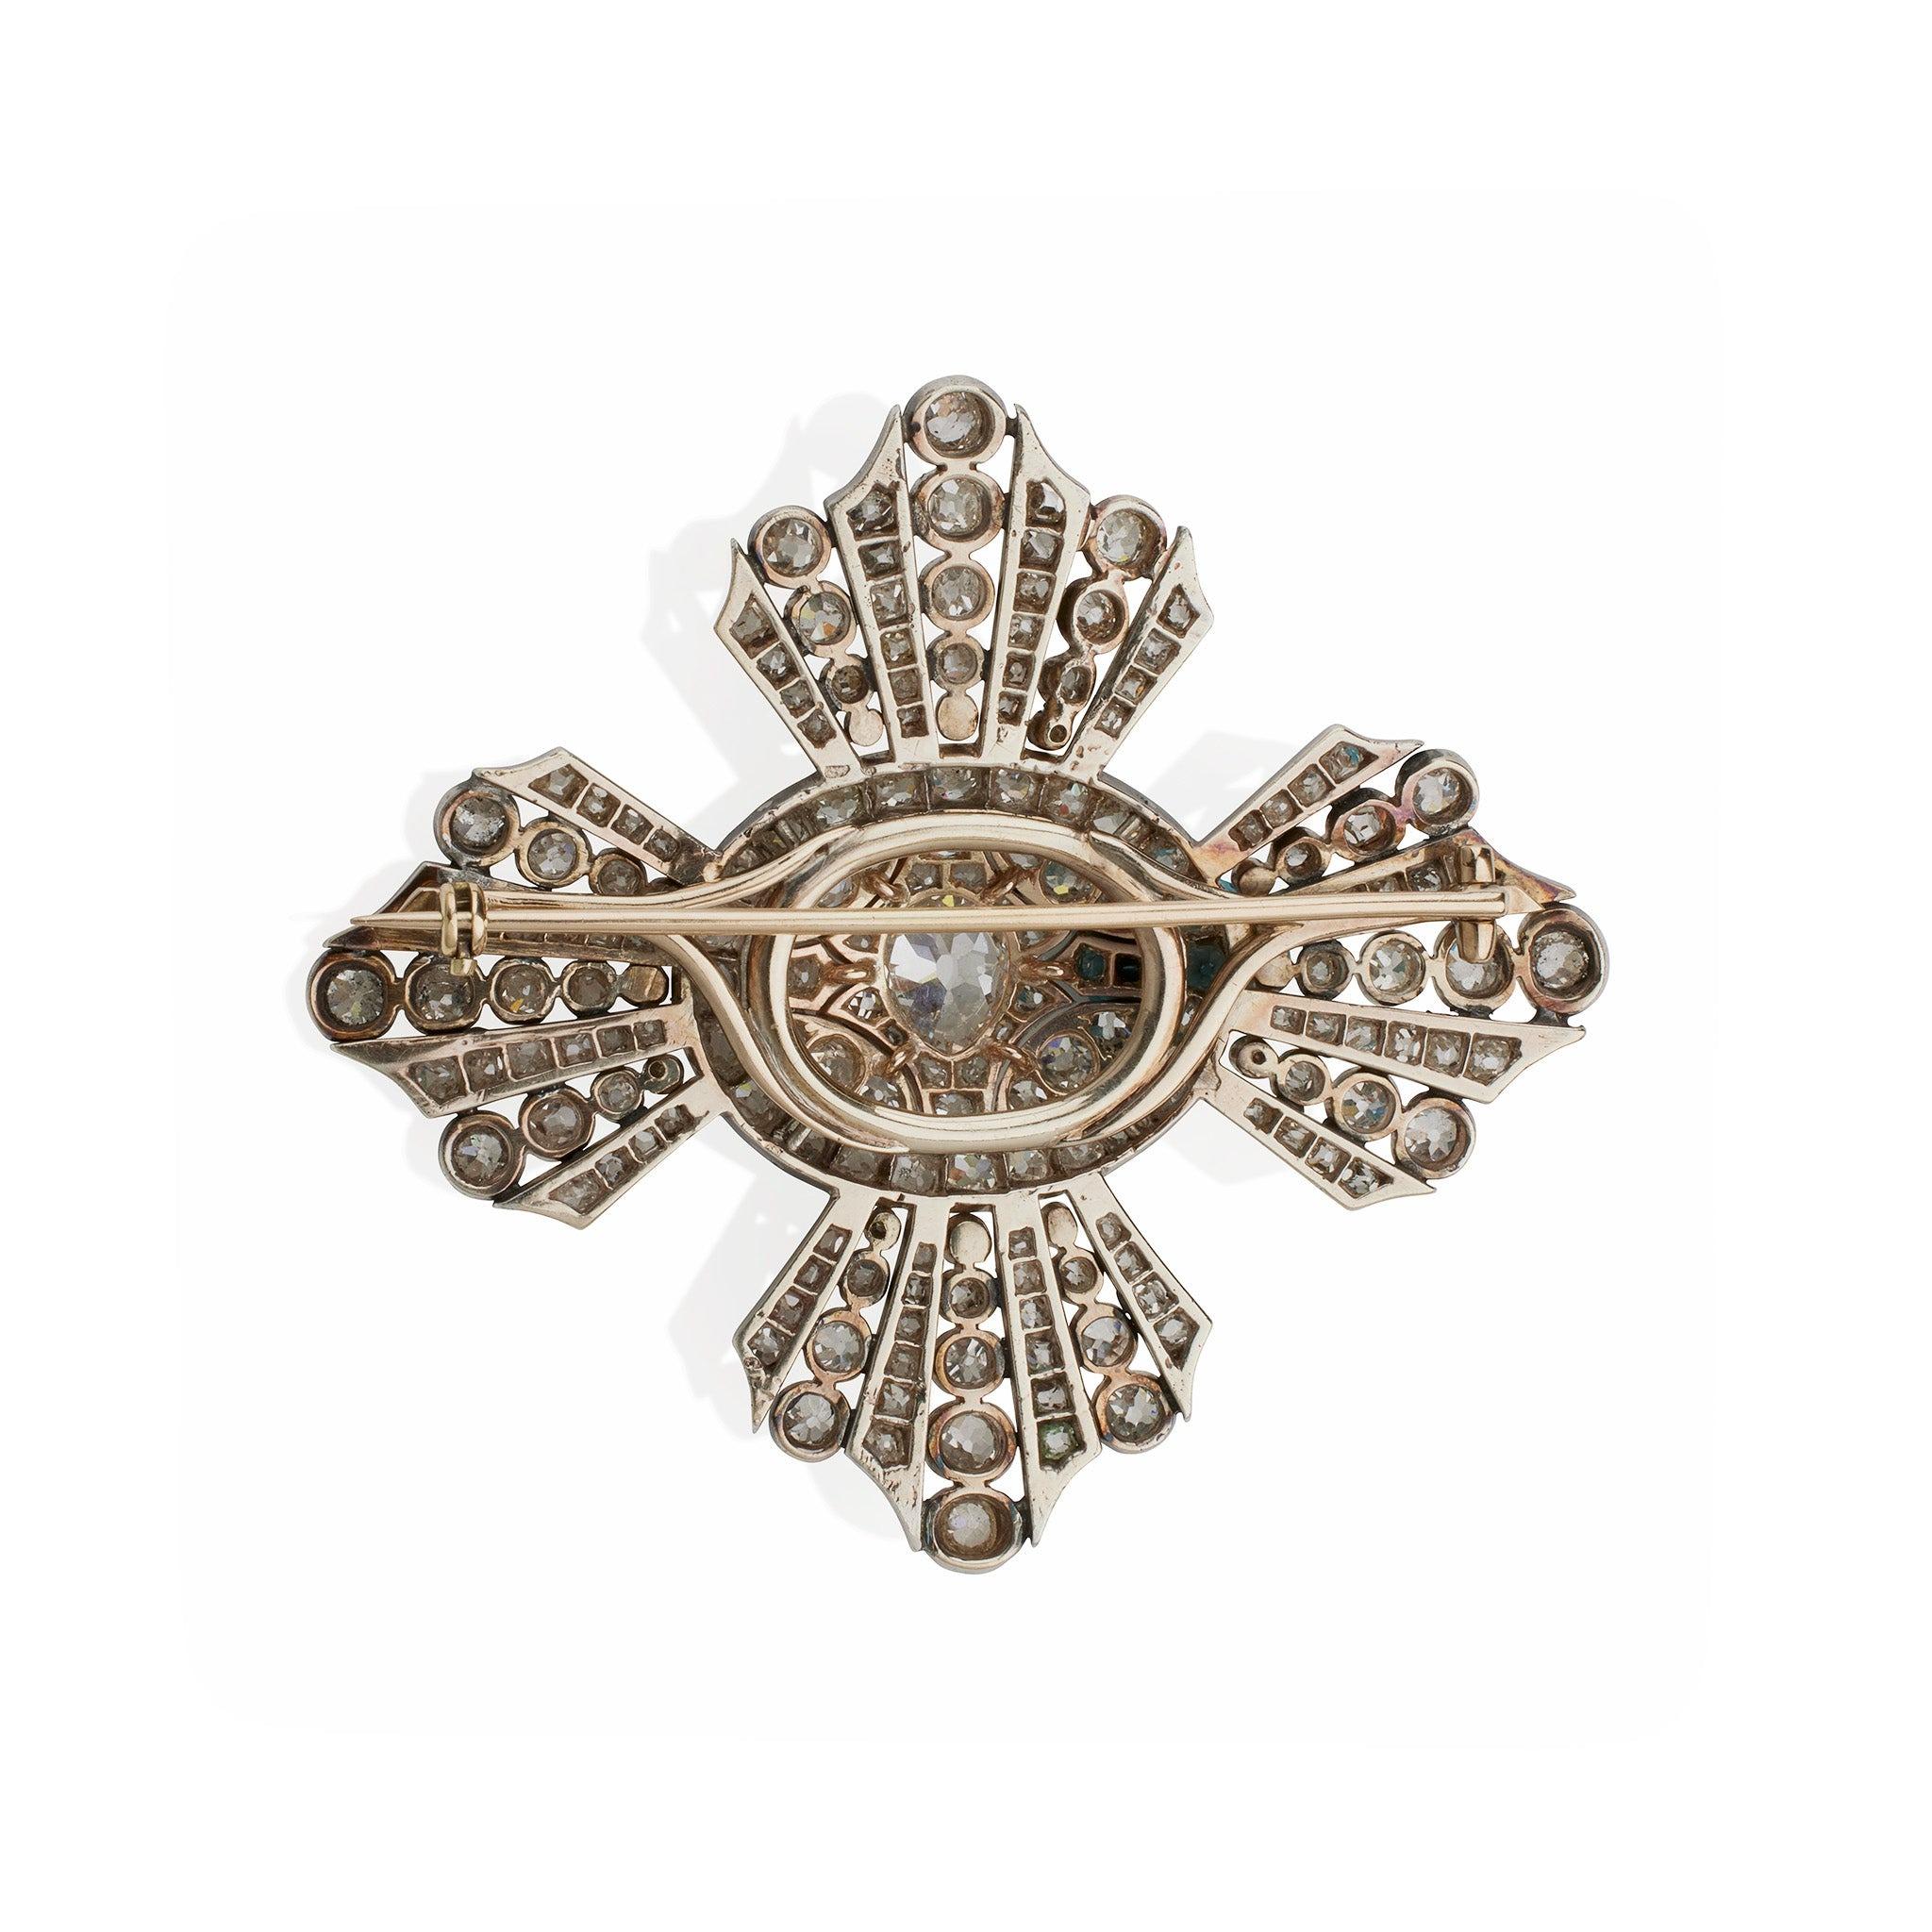 This stylized antique cross brooch set with approximately 14.30 carats of old diamonds dates from circa 1870. It is designed with a domed oval center with flaring, lobed arms, mounted in dark patinated silver and low karat gold. A dramatic design of